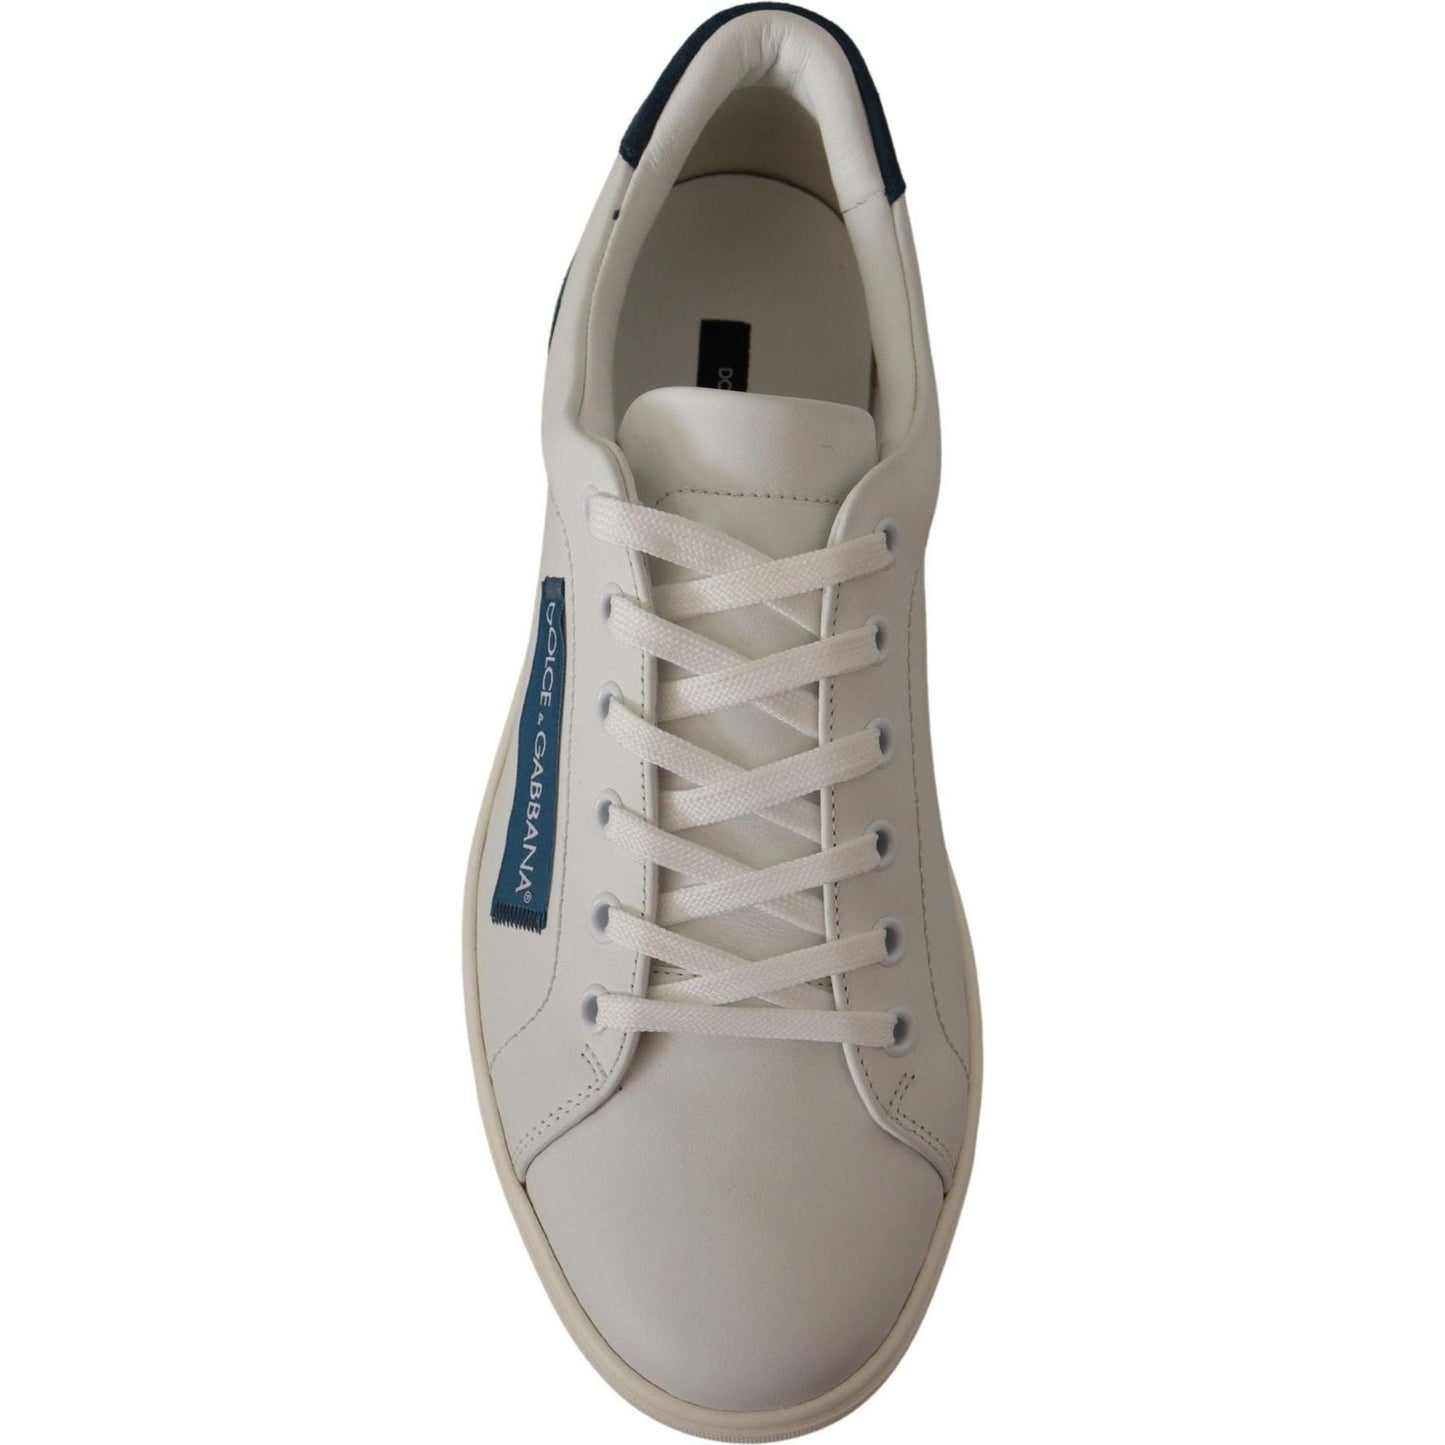 Dolce & Gabbana Chic White Leather Low-Top Sneakers white-blue-leather-low-top-sneakers-1 IMG_1895-scaled-facc225d-ceb.jpg